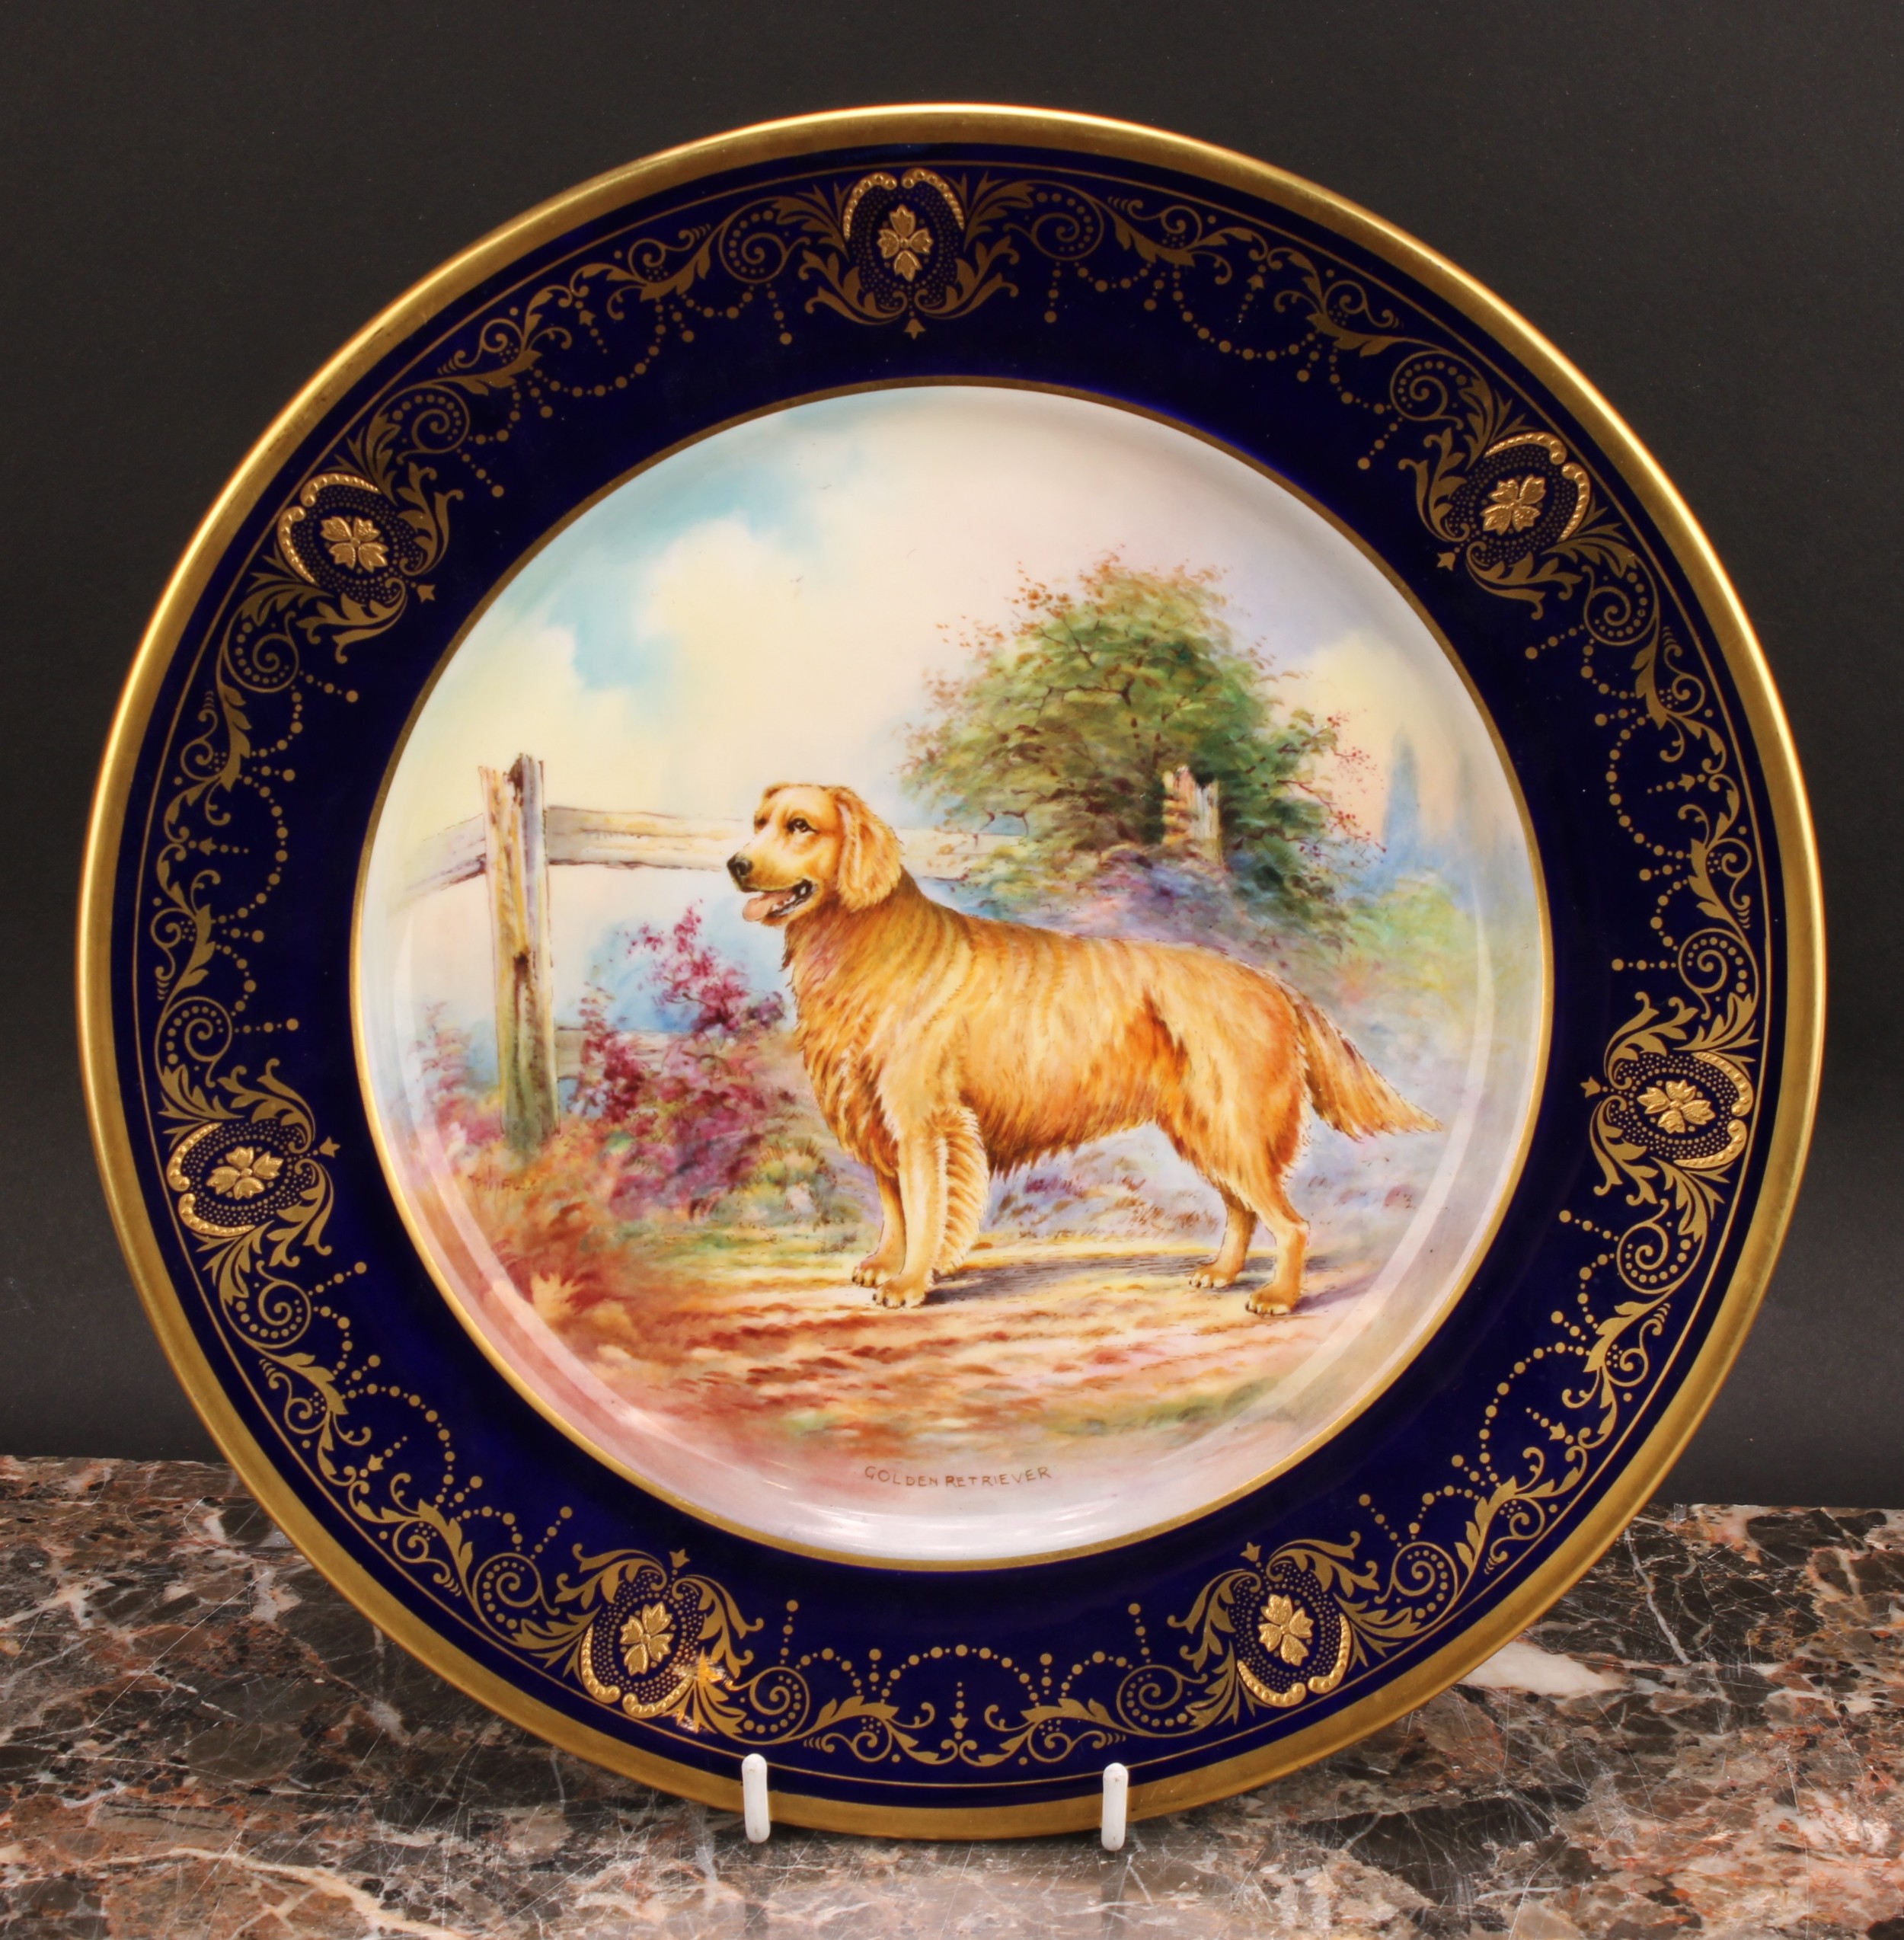 An Aynsley circular plate, painted by J. Shaw, signed to verso, with a Golden Retriever by a - Image 2 of 5